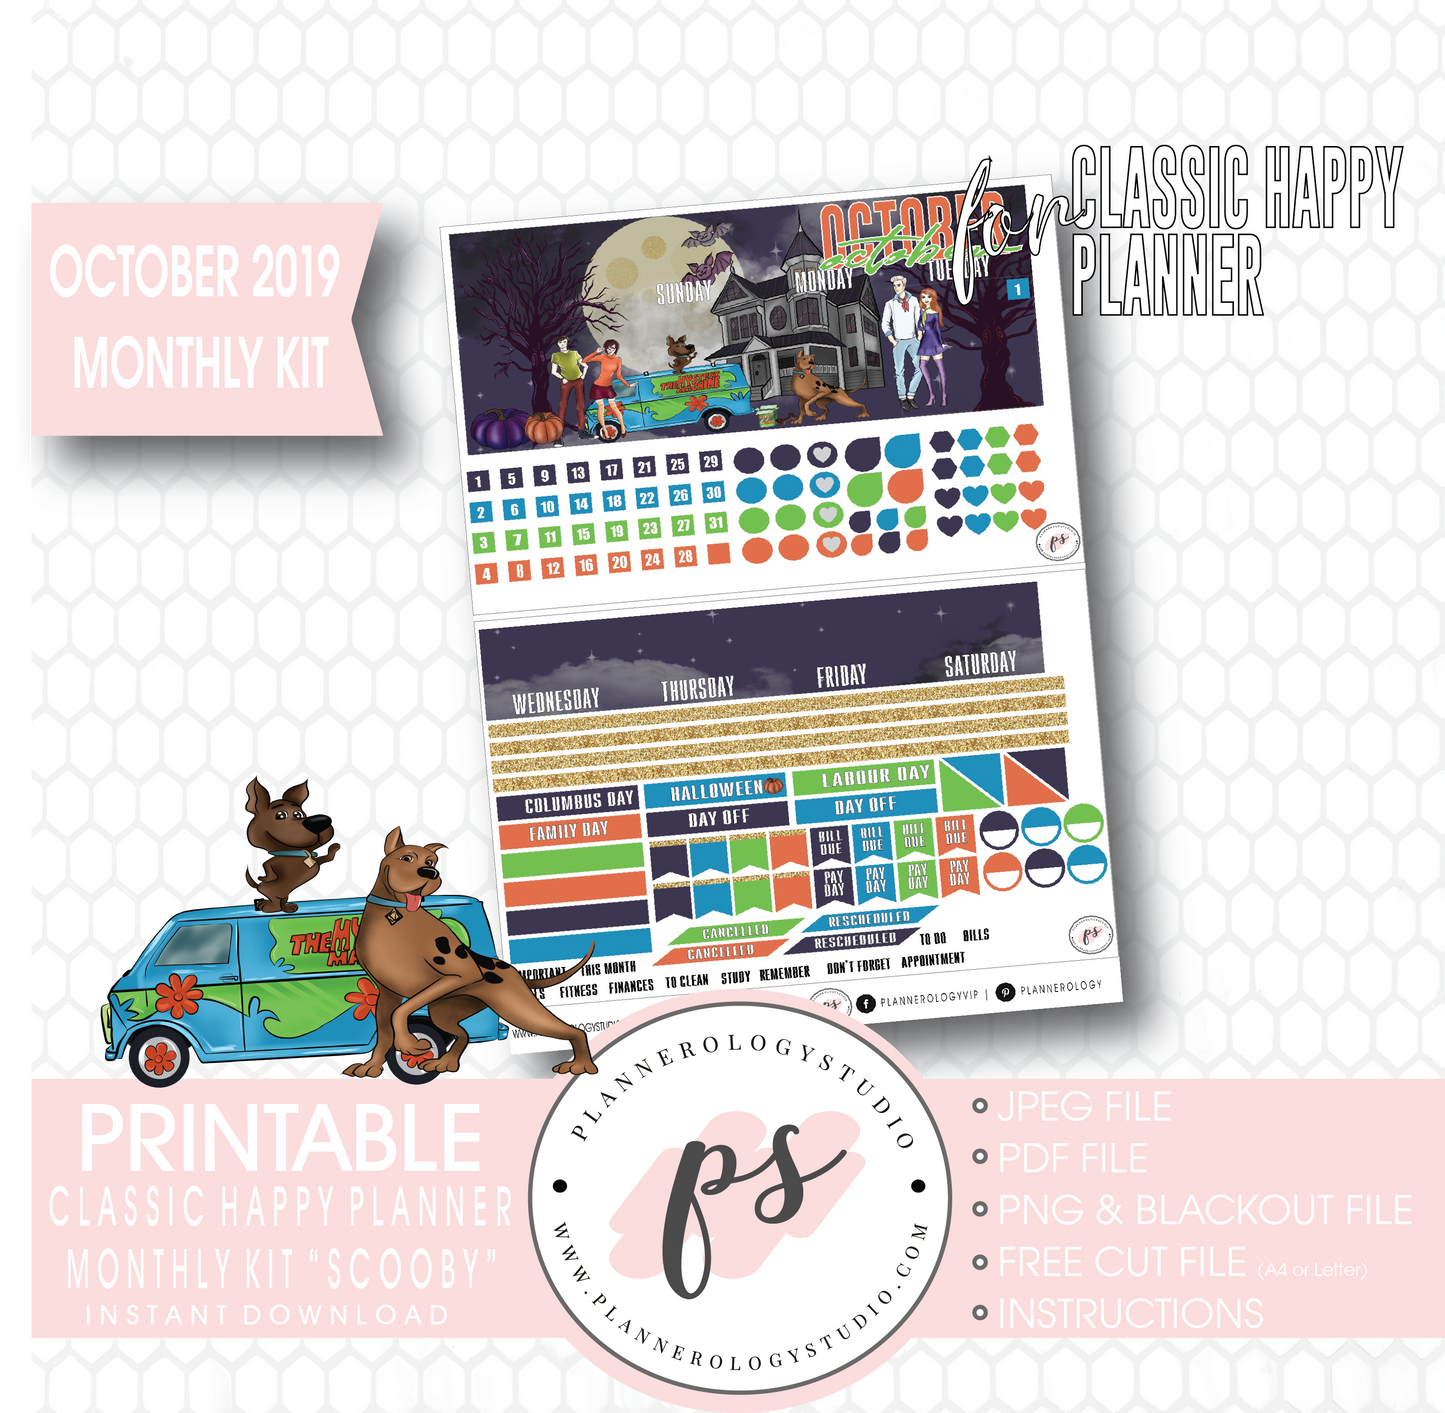 Scooby Halloween October 2019 Halloween Monthly View Kit Printable Planner Stickers (for use with Classic Happy Planner) - Plannerologystudio